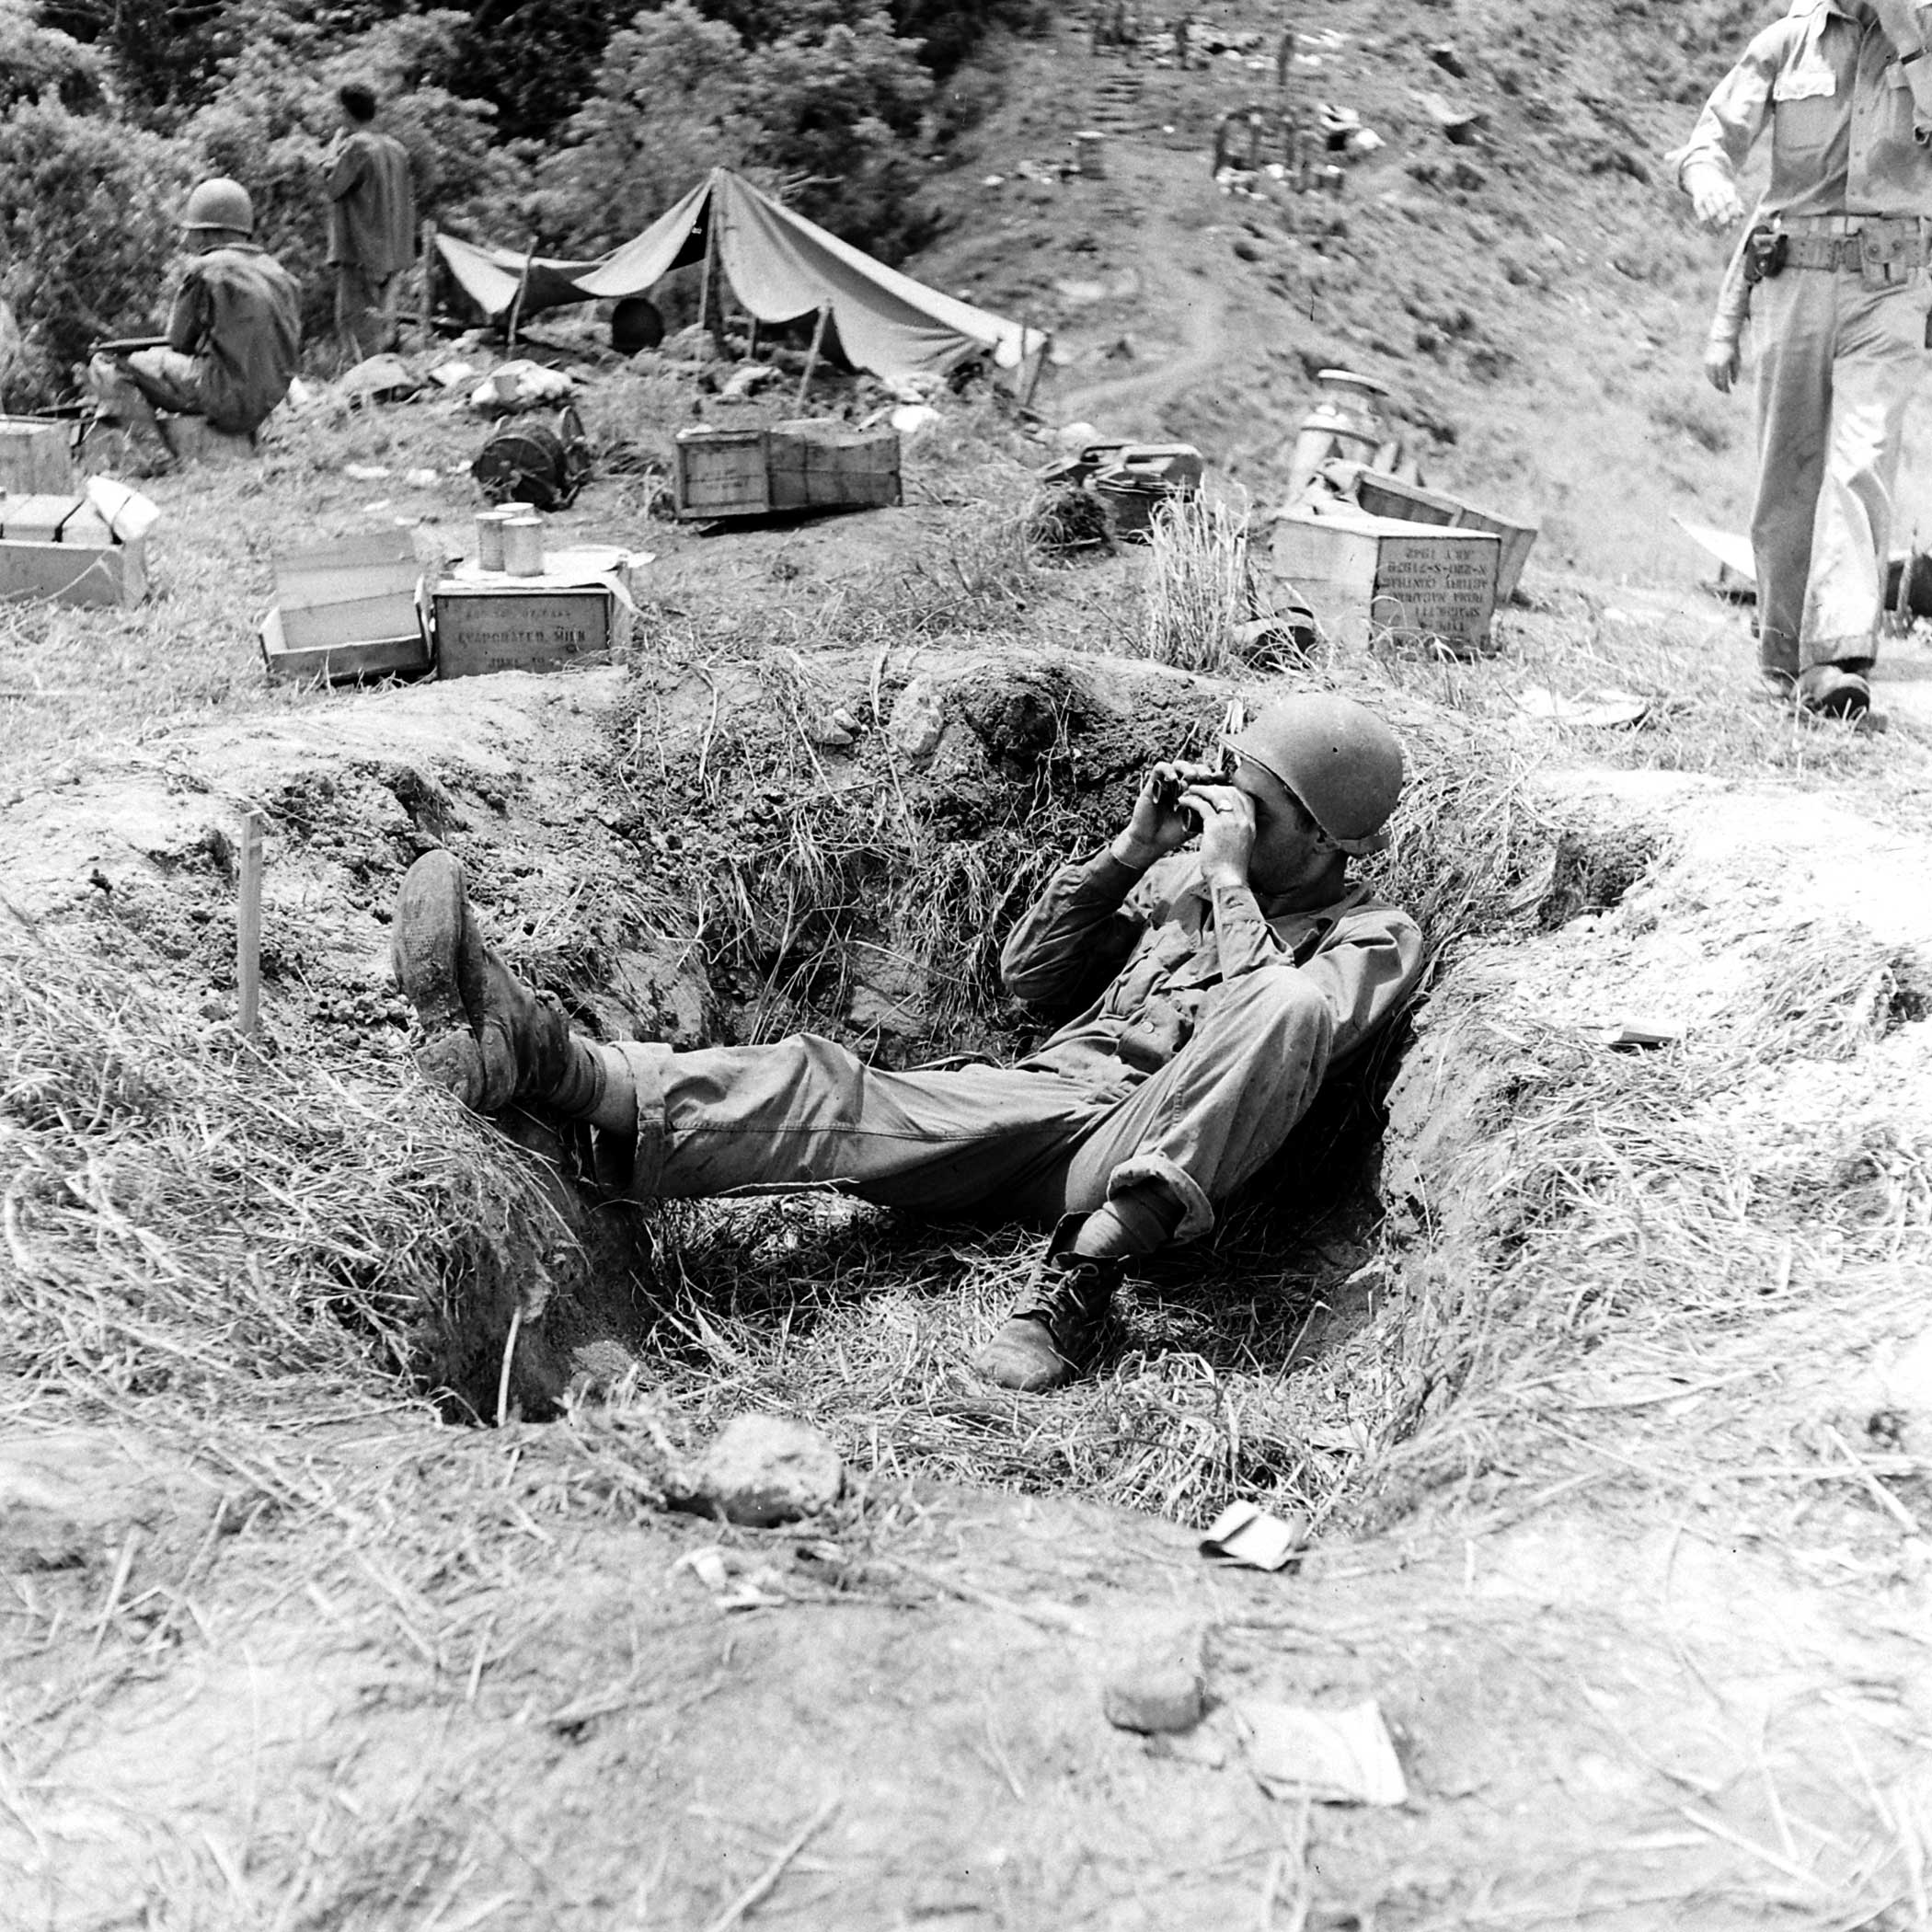 "A lookout on Burnt Knoll makes himself comfortable in an old shell hole."